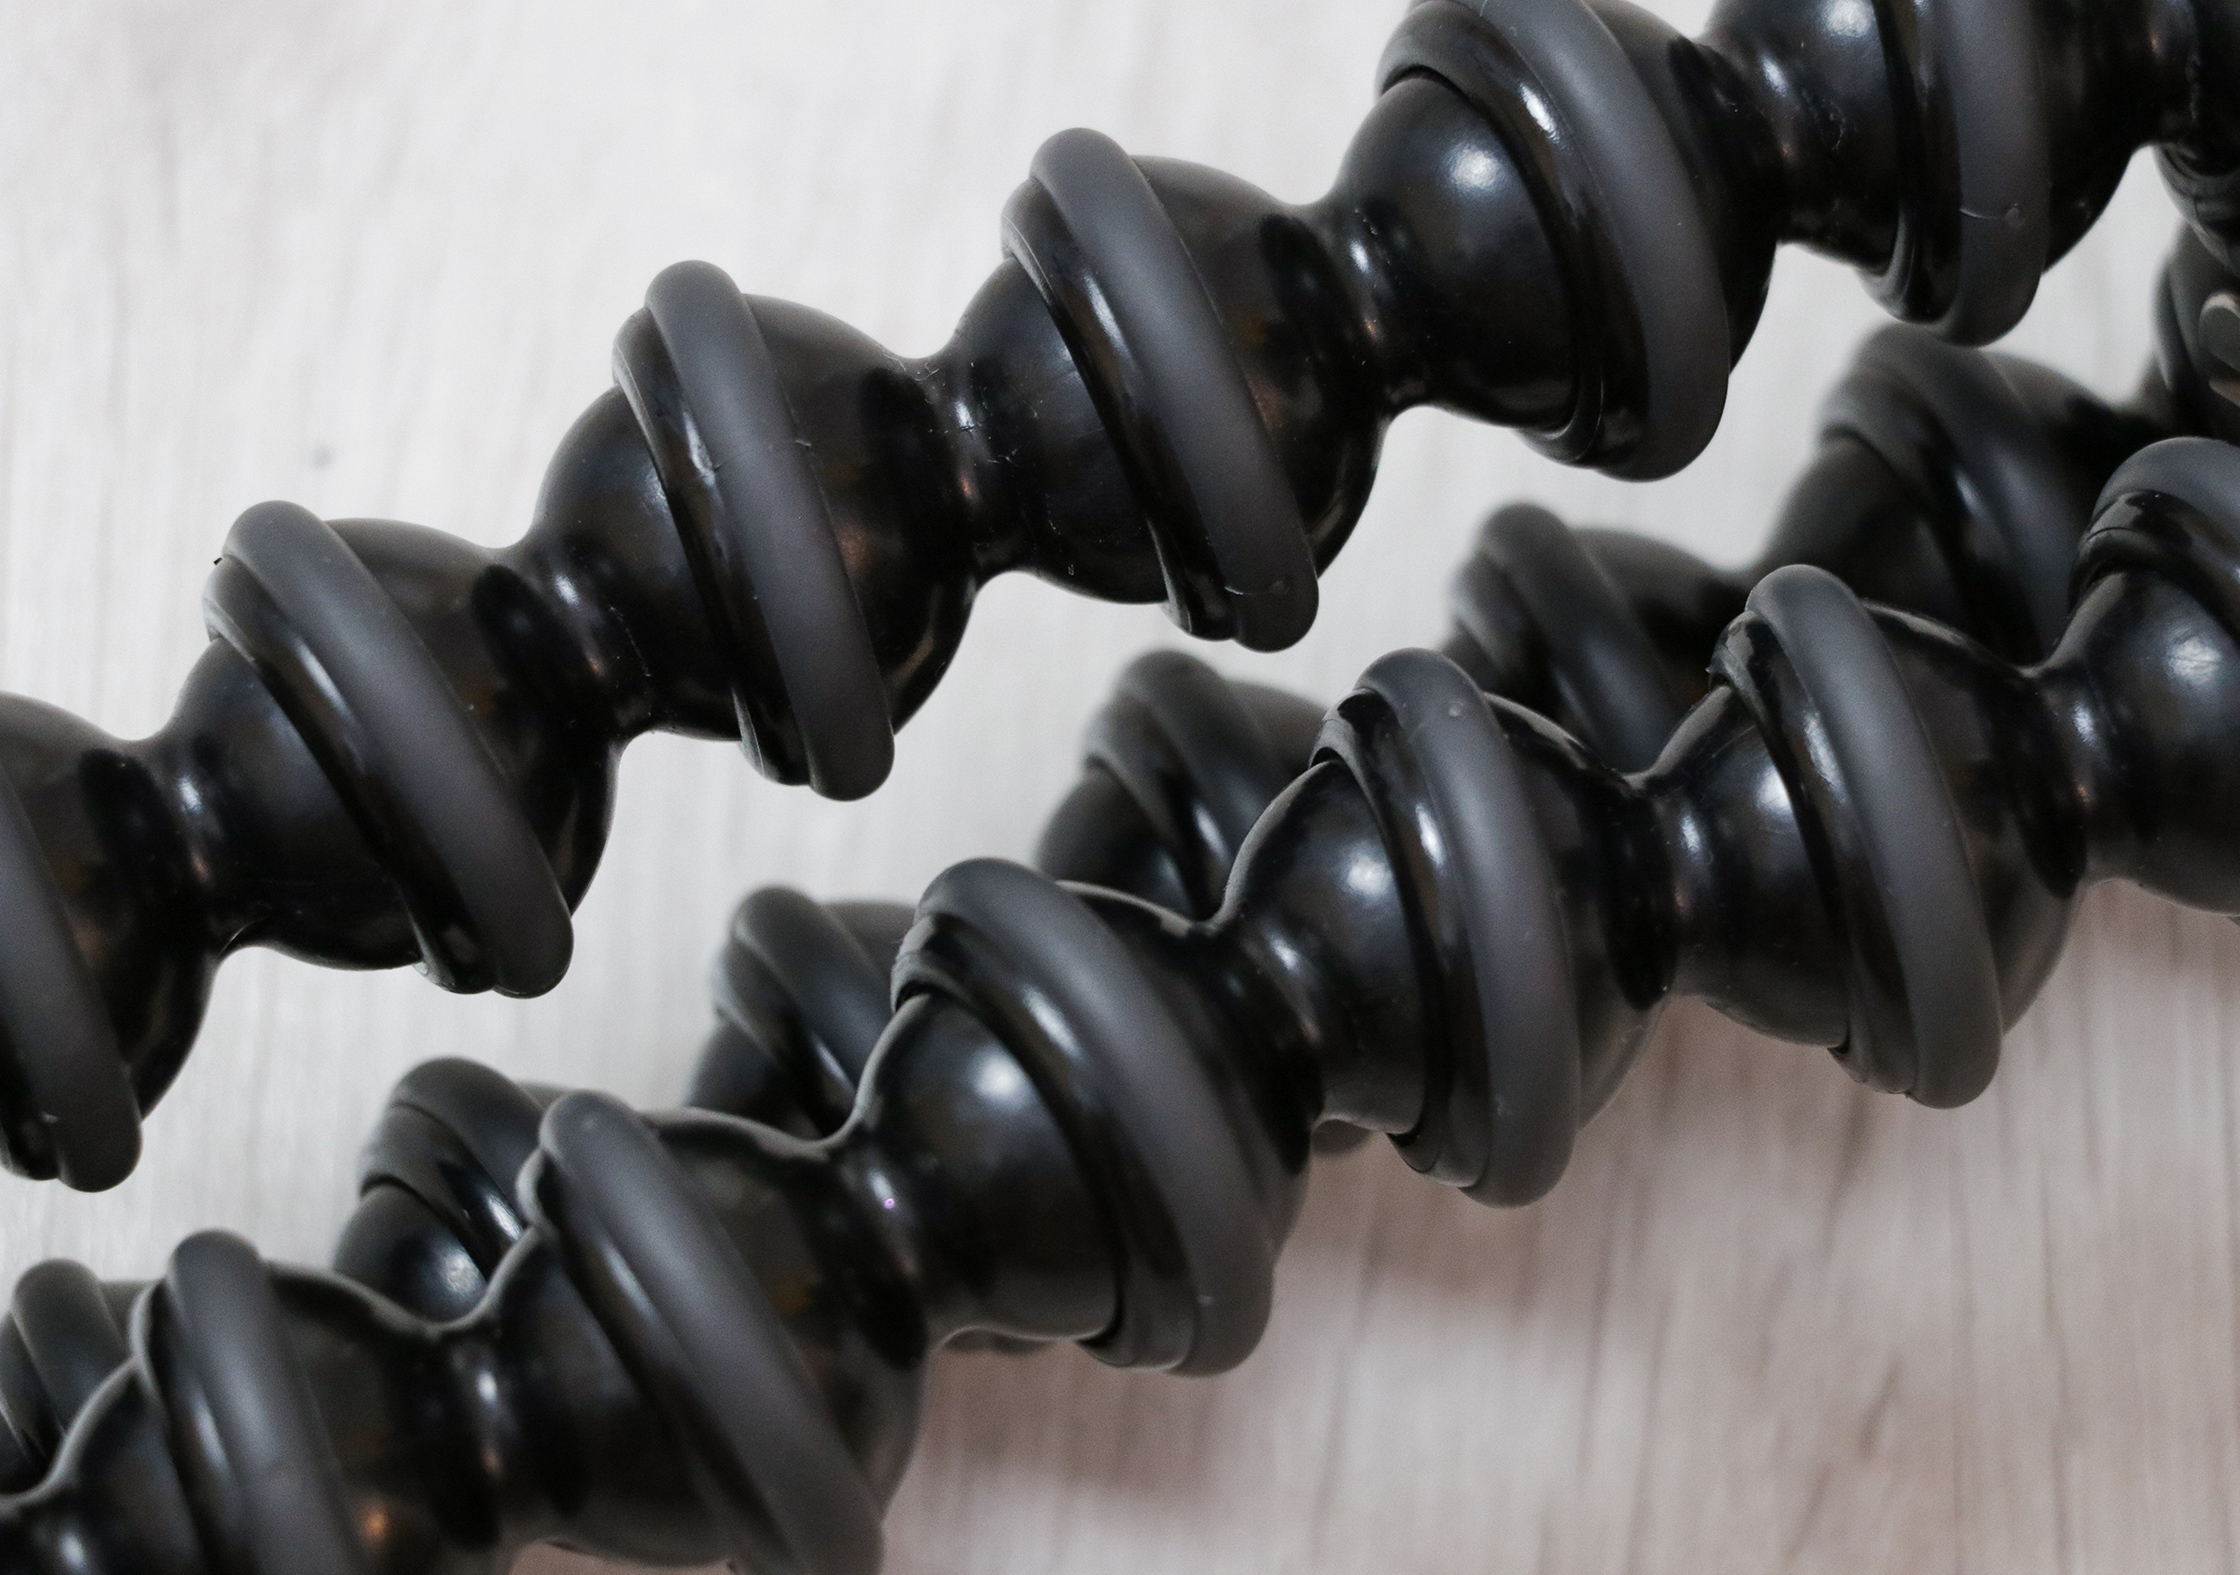 TPE Rubber And ABS Plastic Of The JOBY GorillaPod